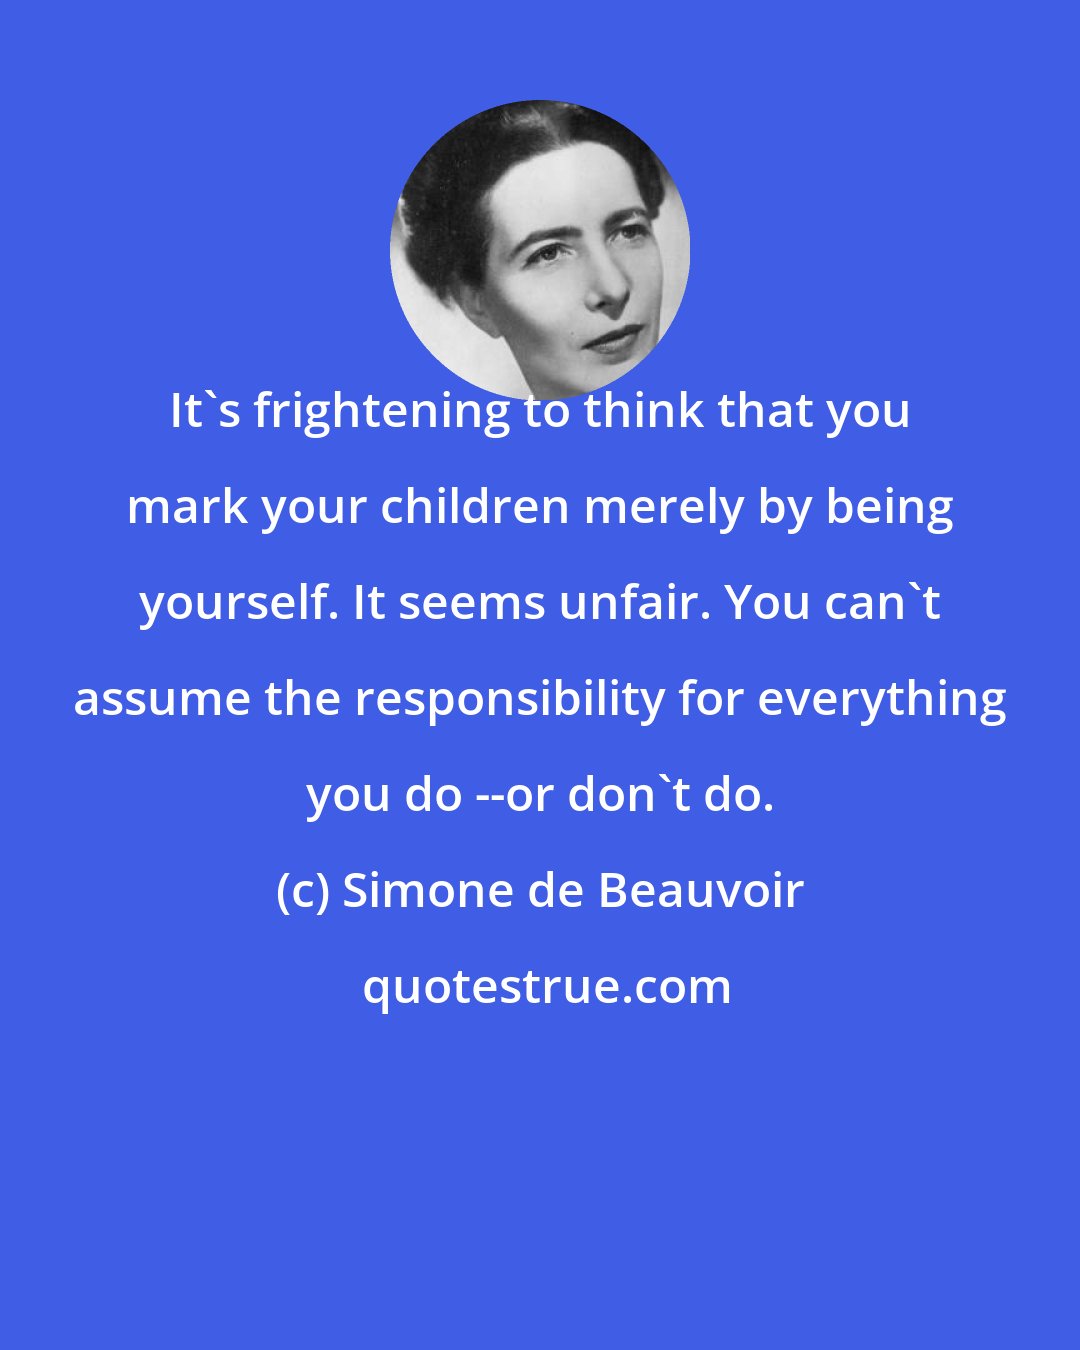 Simone de Beauvoir: It's frightening to think that you mark your children merely by being yourself. It seems unfair. You can't assume the responsibility for everything you do --or don't do.